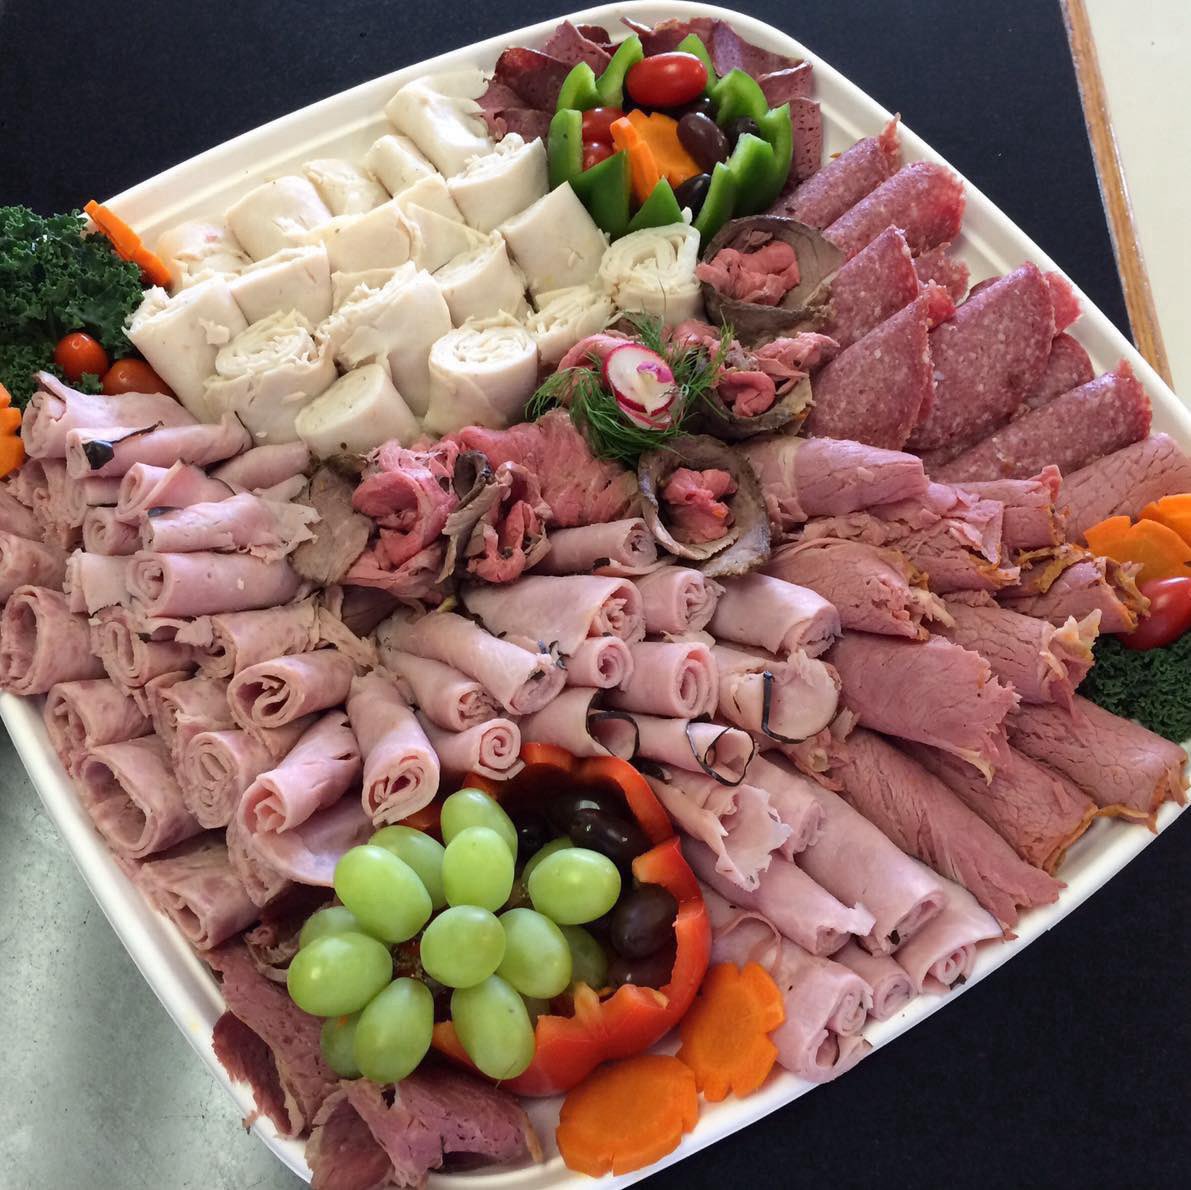 Order a Manna meat tray or one of our many catering trays for your New Year’s Eve party 🥳🎉🍾

Order online right here: mannabakery.ca/collections/ca…

#newyear #newyearseve2024 #newyearseve #catering #cateringservice #trays #meattrays #party #partyideas #partyplanner #holidays